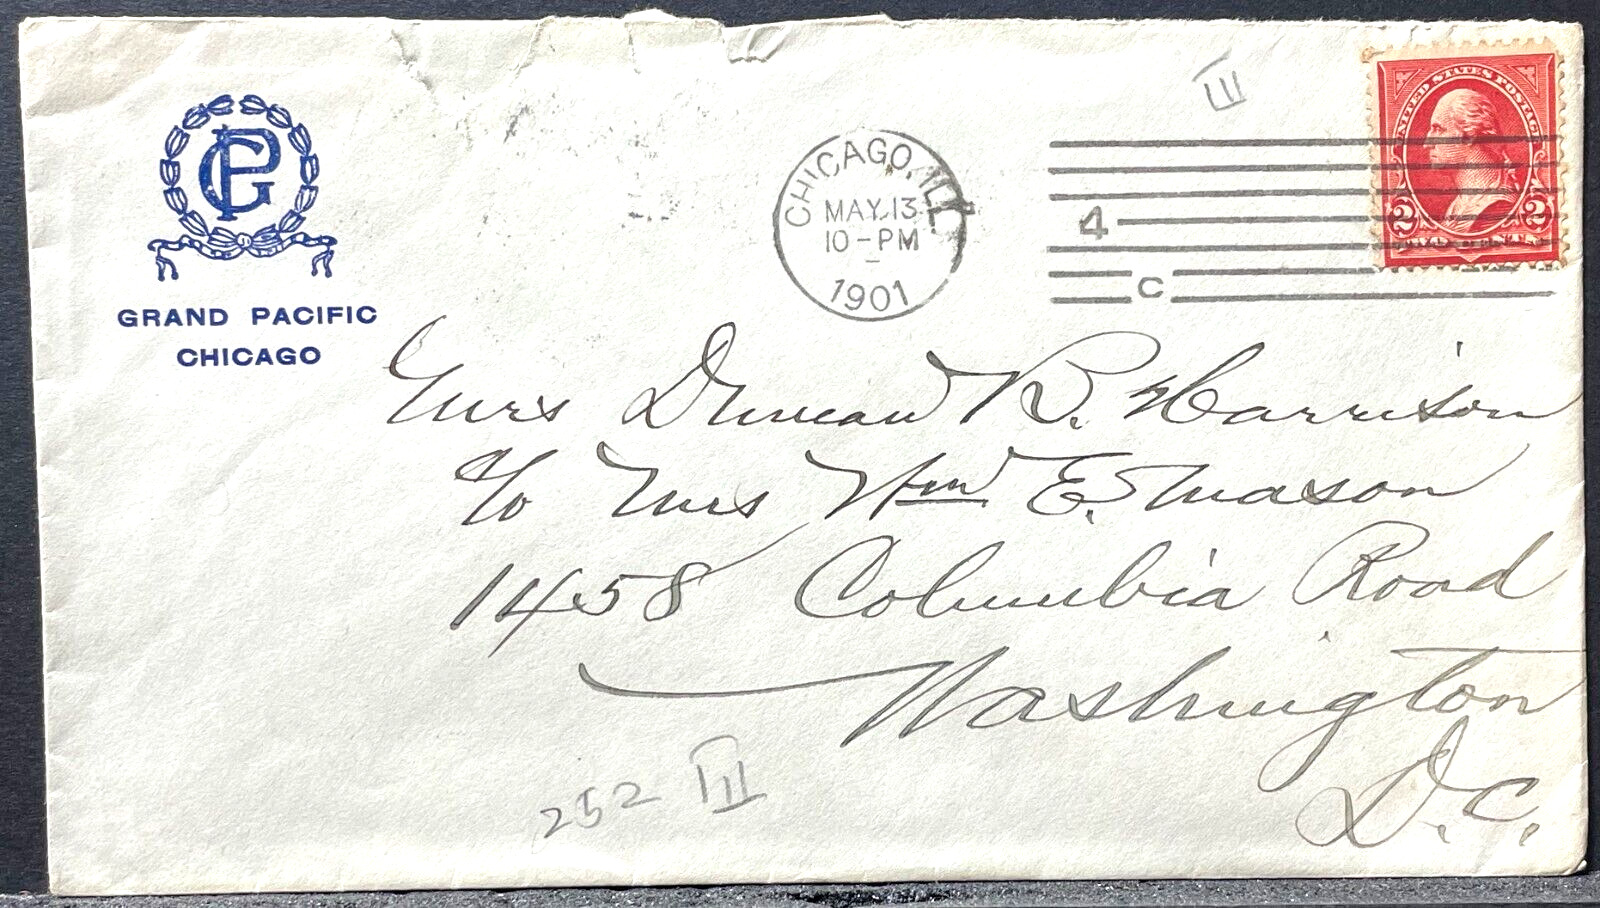 1901 Chicago Grand Pacific Hotel Envelope with Red 2 Cent Washington Stamp